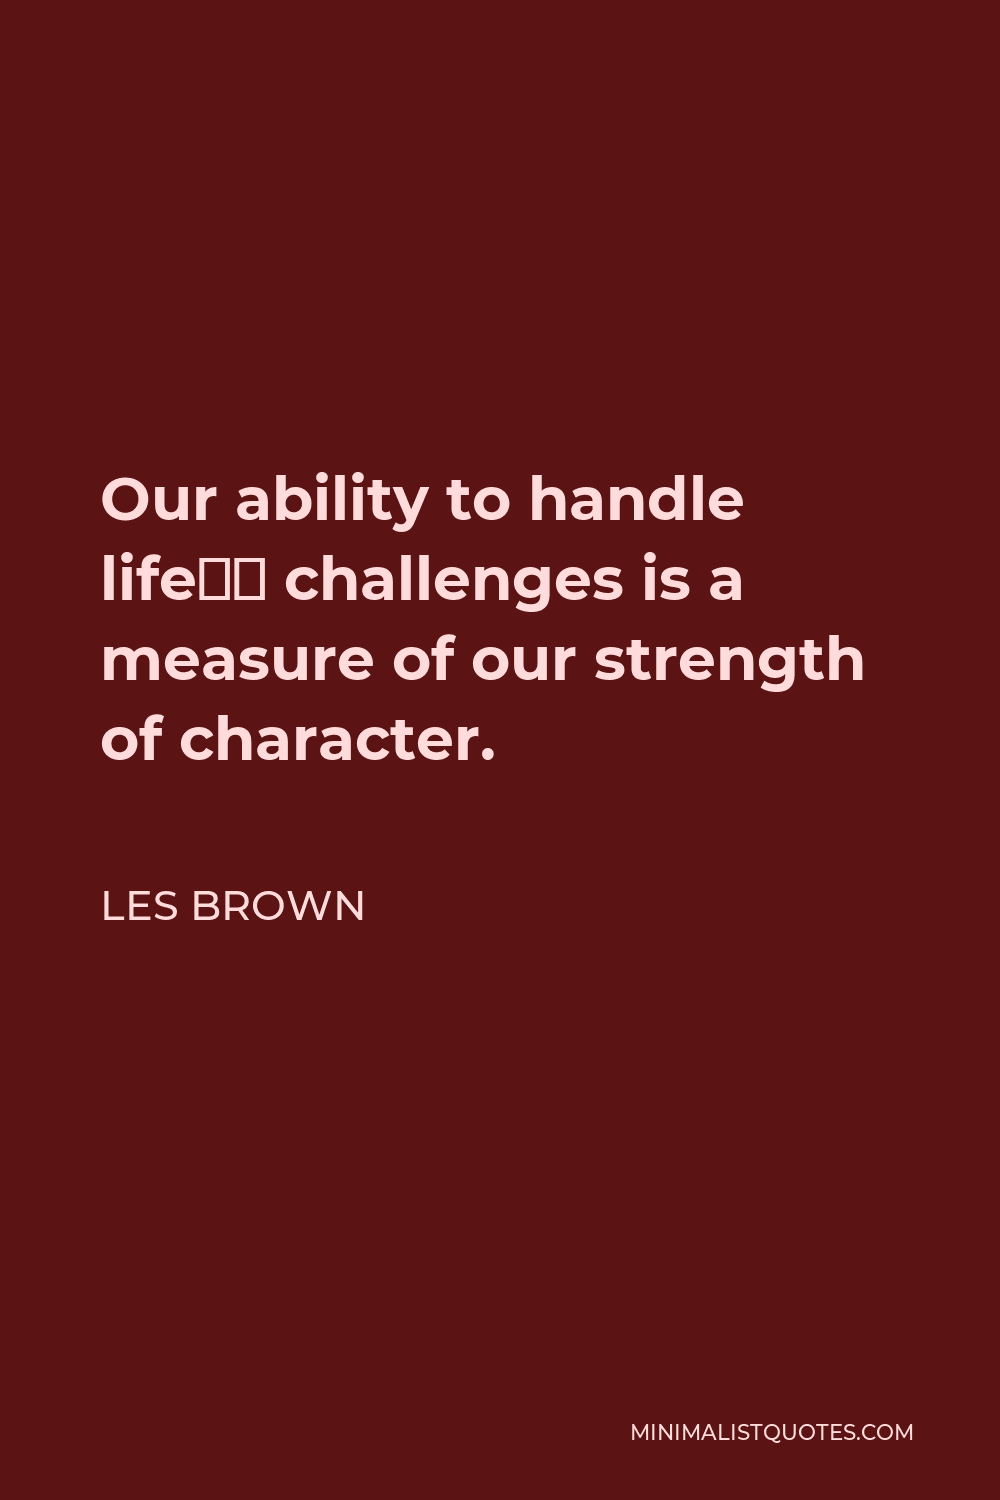 Les Brown Quote - Our ability to handle life’s challenges is a measure of our strength of character.